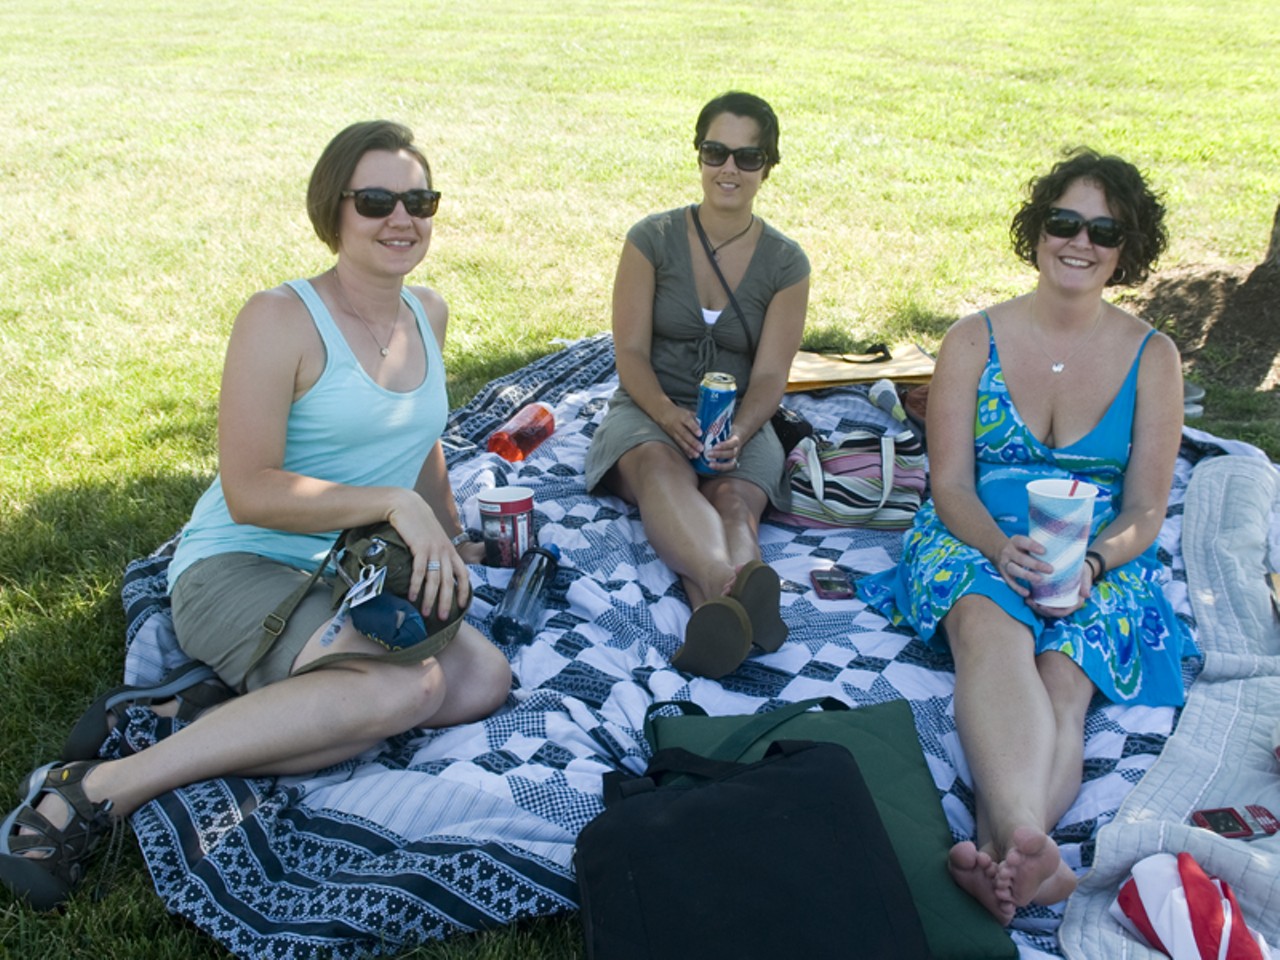 Fans grab a scarce spot of shade to beat the heat at Lilith Fair in St. Louis.